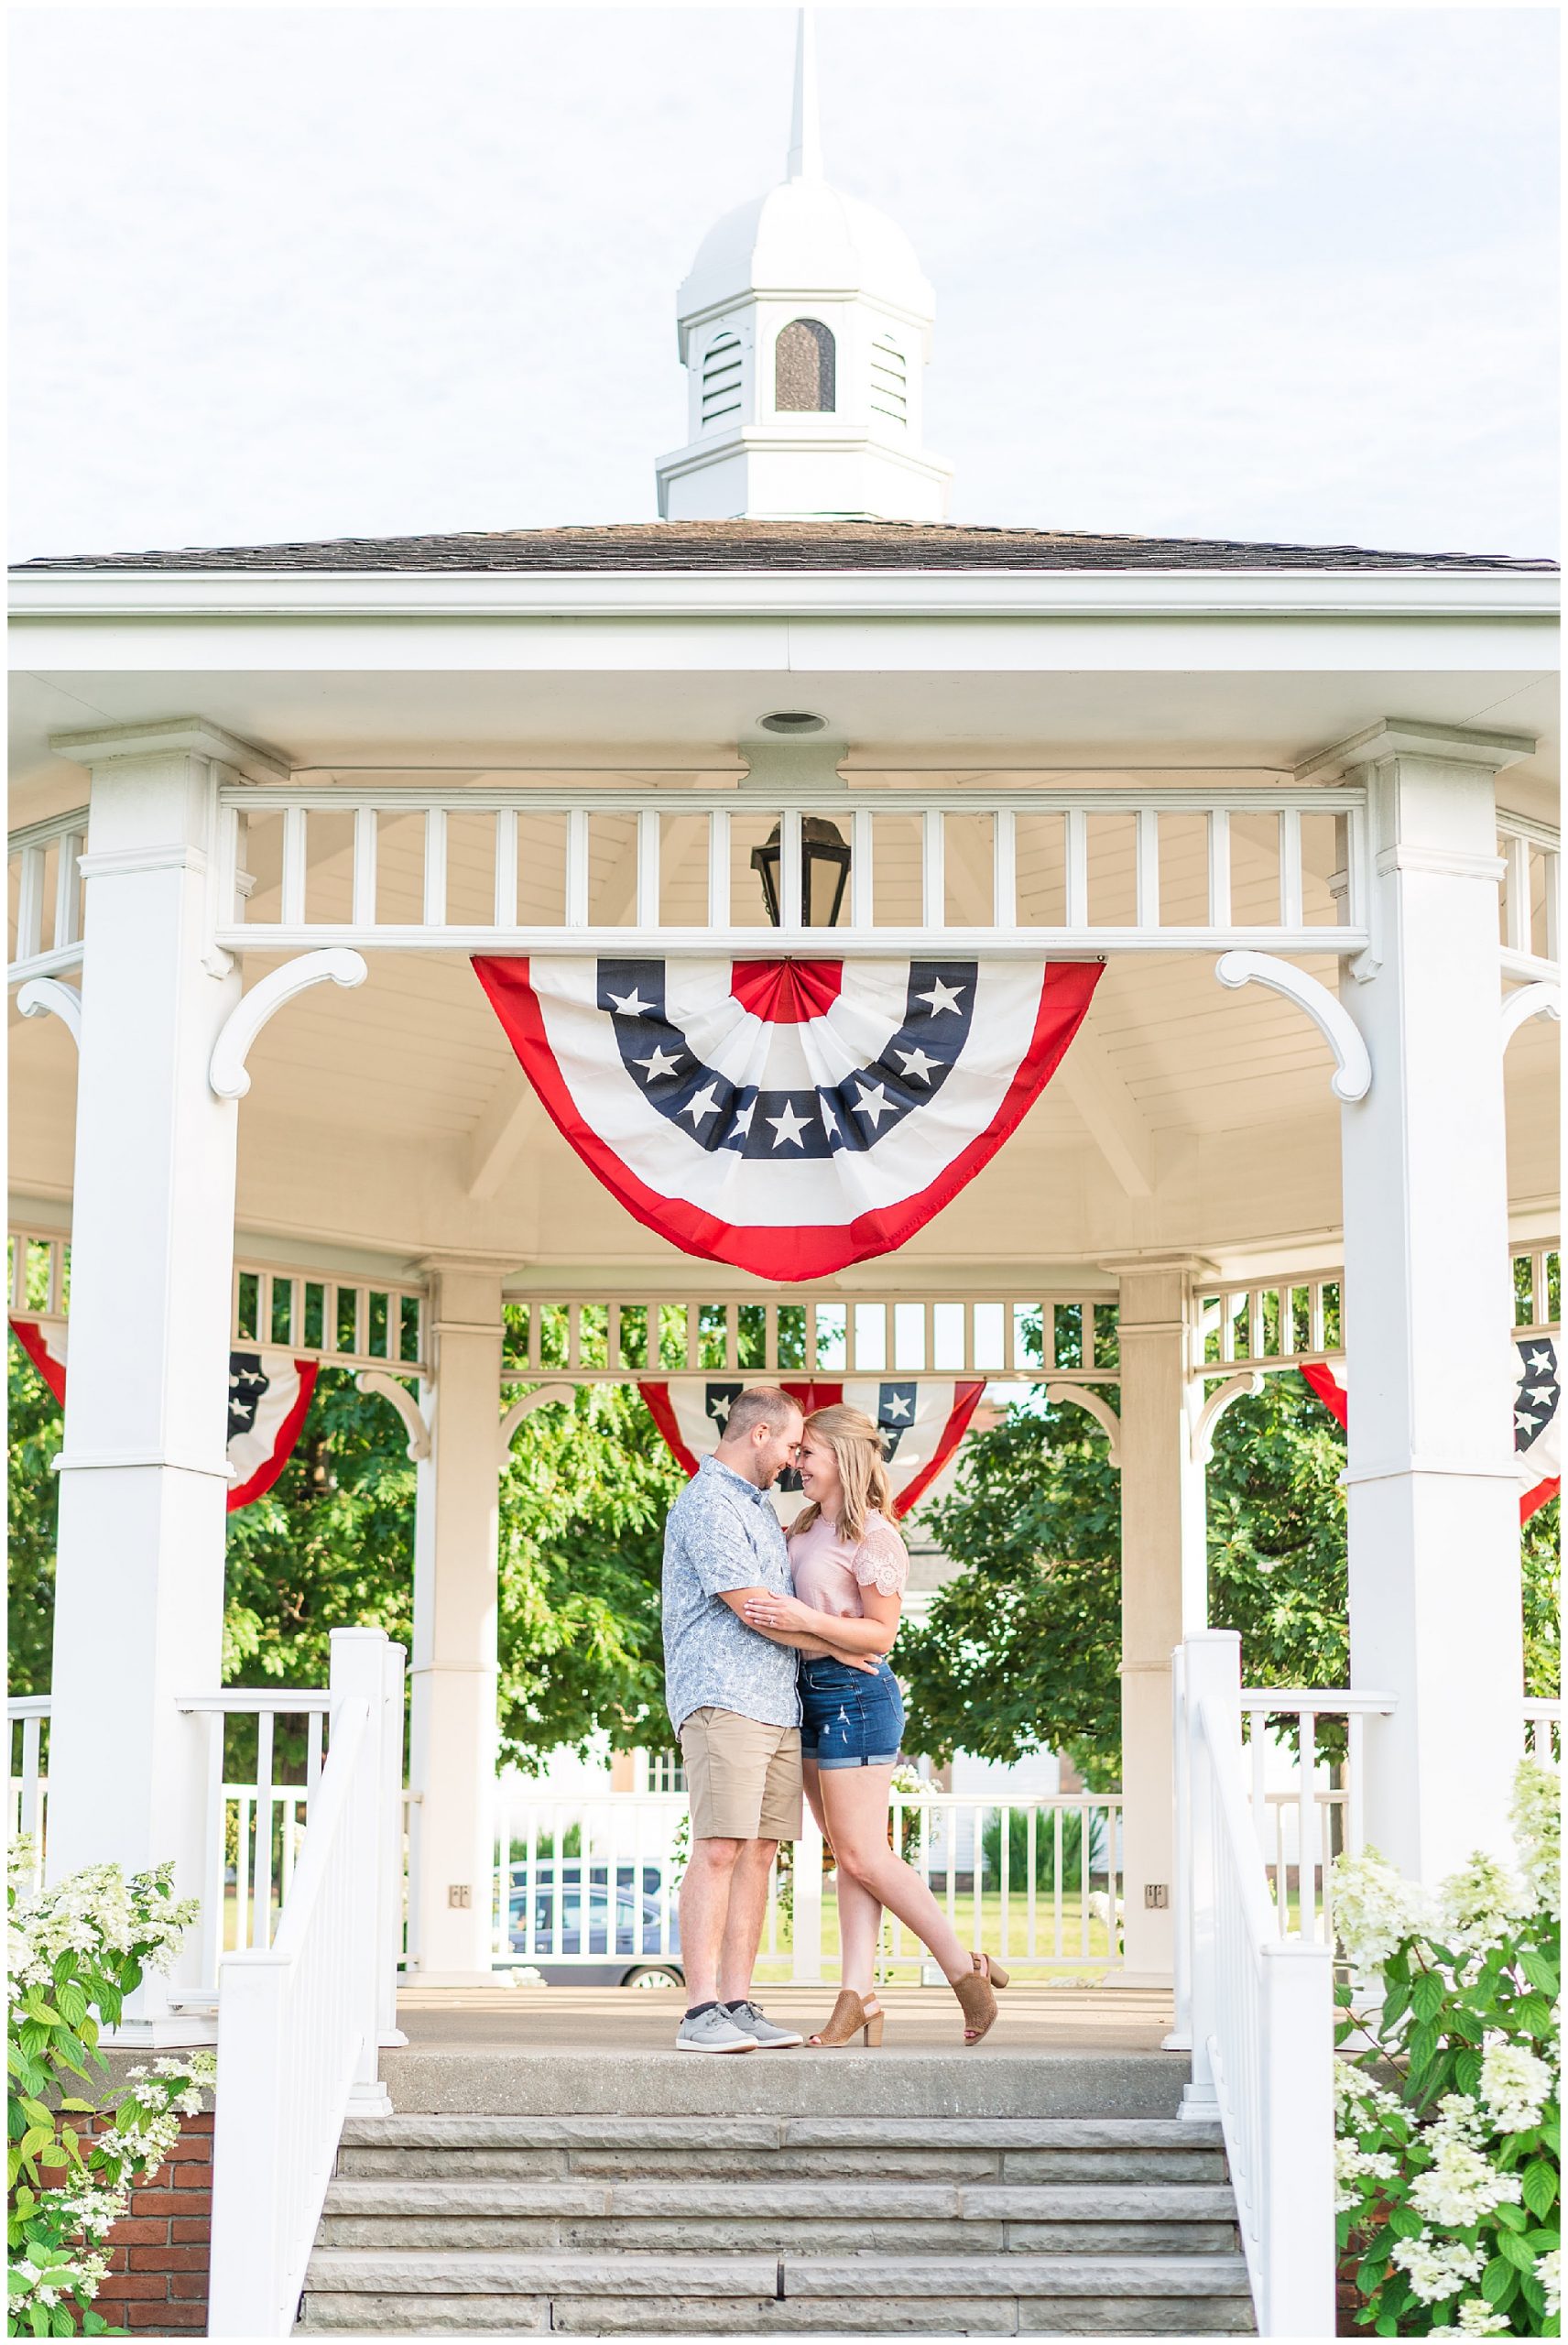 Engaged couple pose in front of summer gazebo decked in azalea bushes in Cleveland Ohio